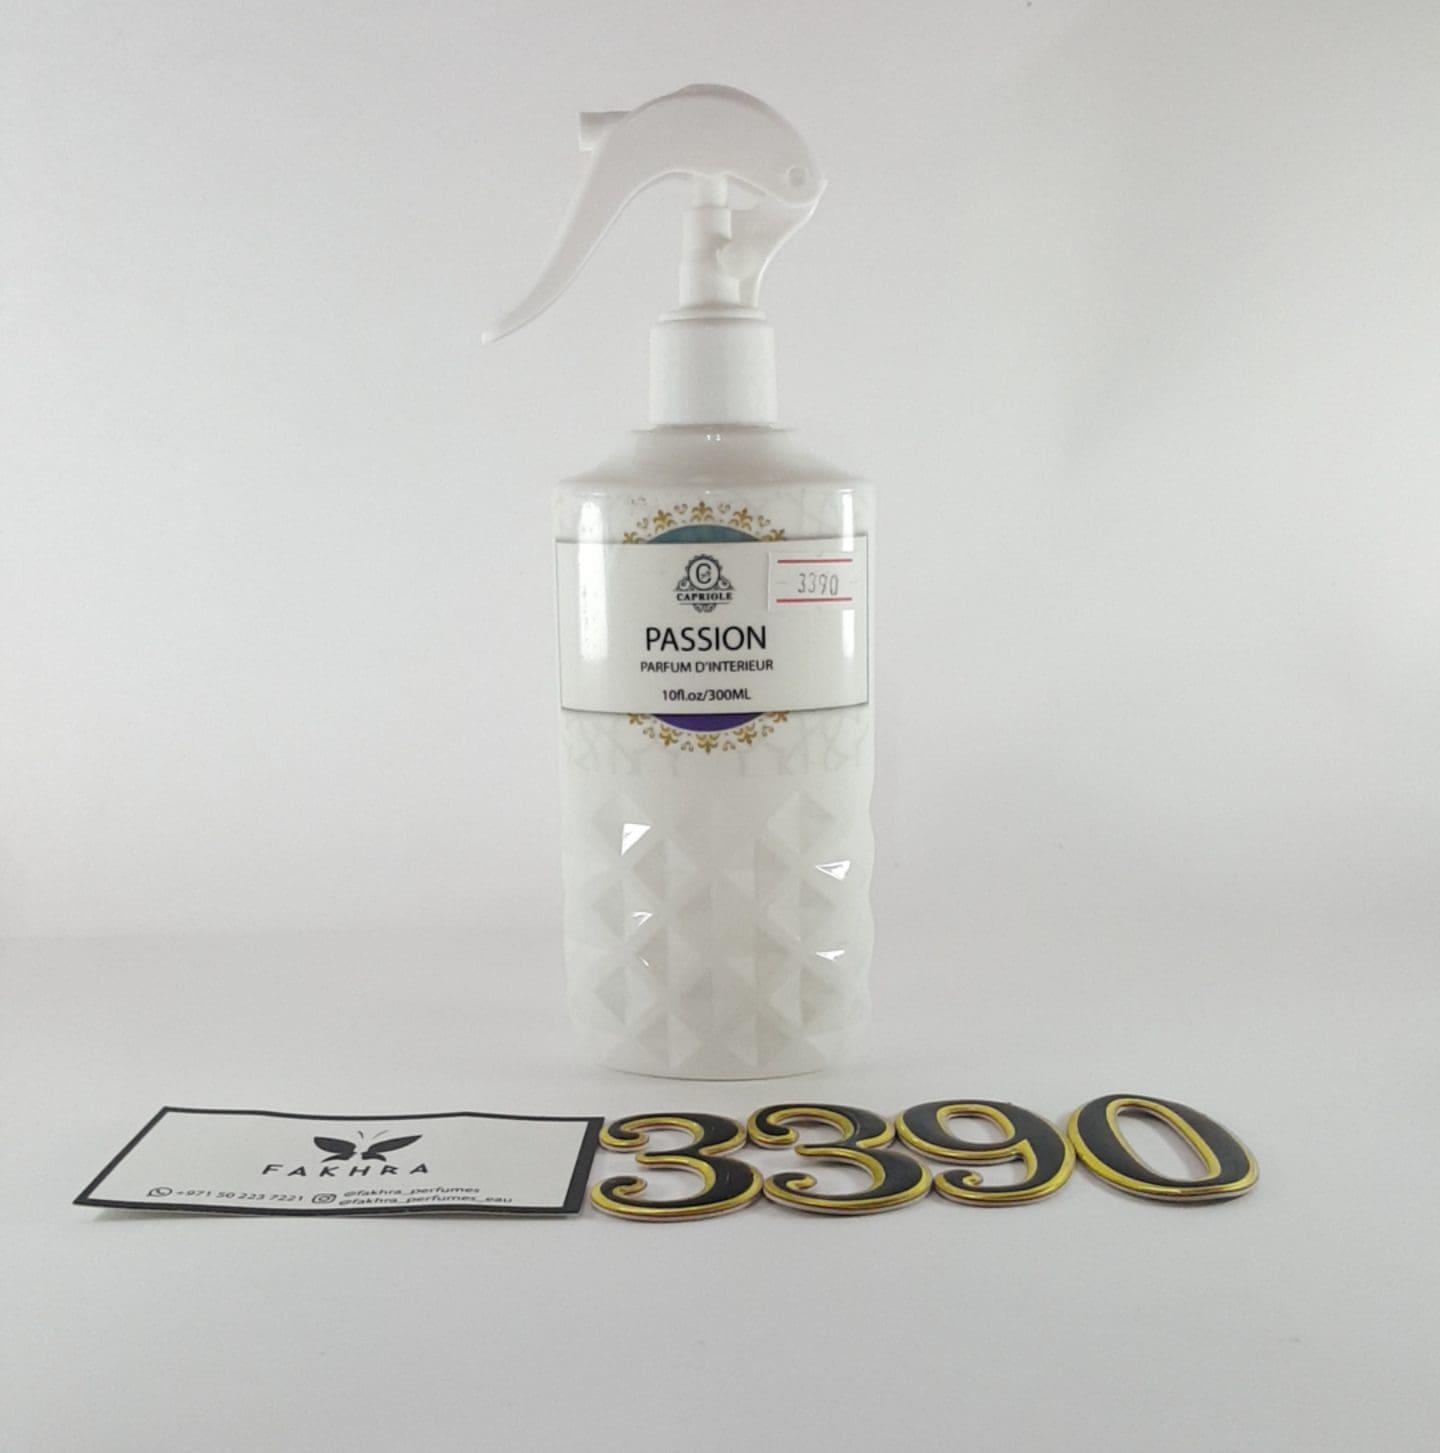 3390 Capriole PASSION Home perfume 300 ml